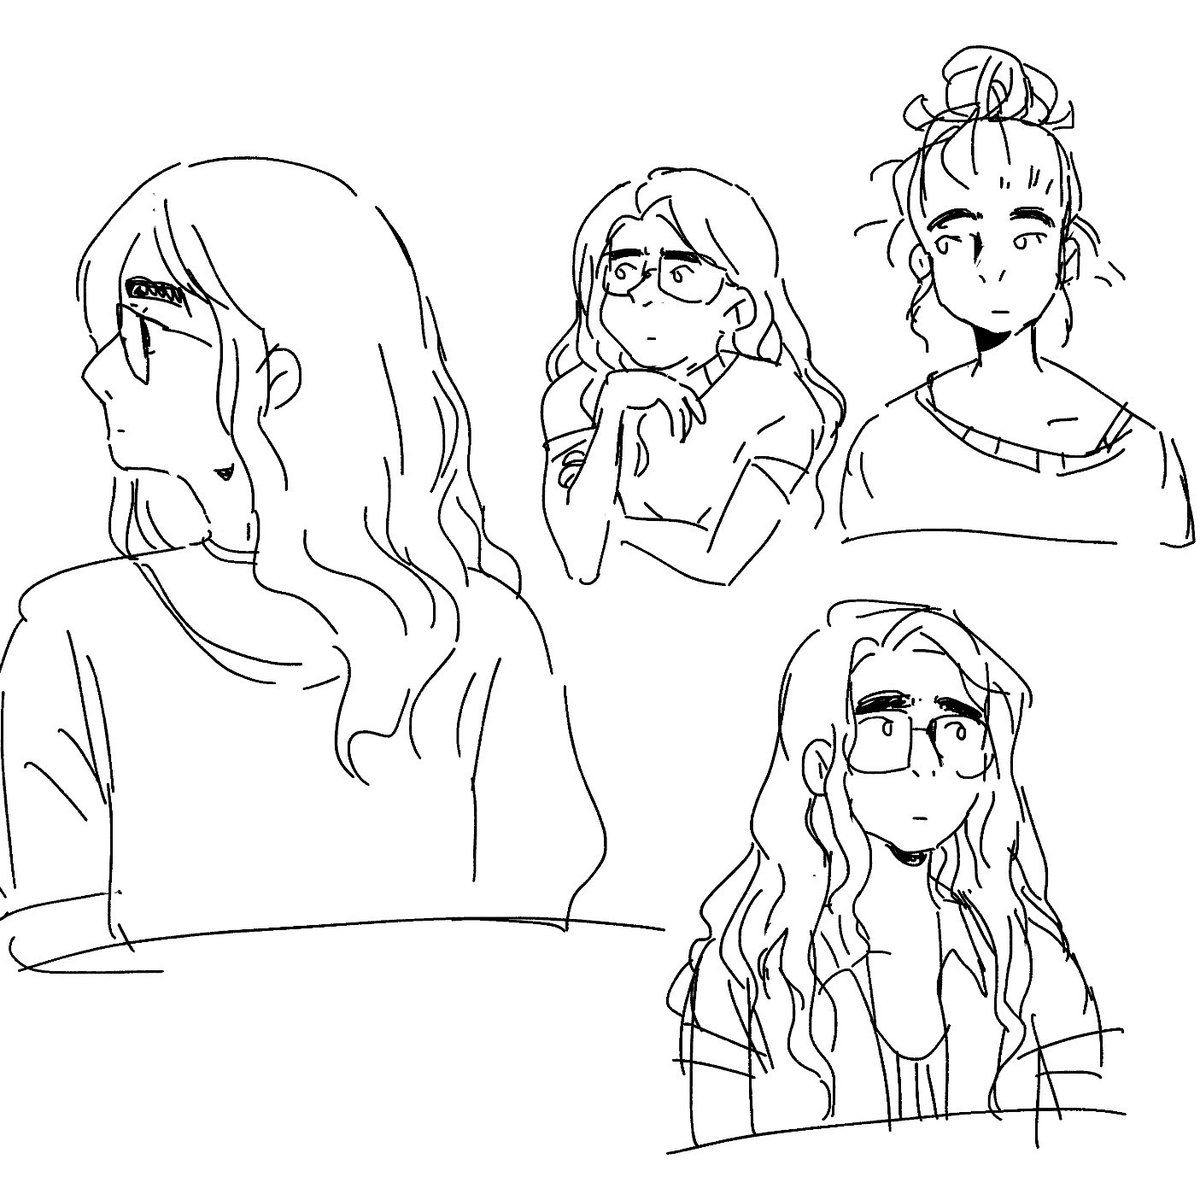 recent warmup doodles aka watching the rapid disintegration of my sense of self in real time 